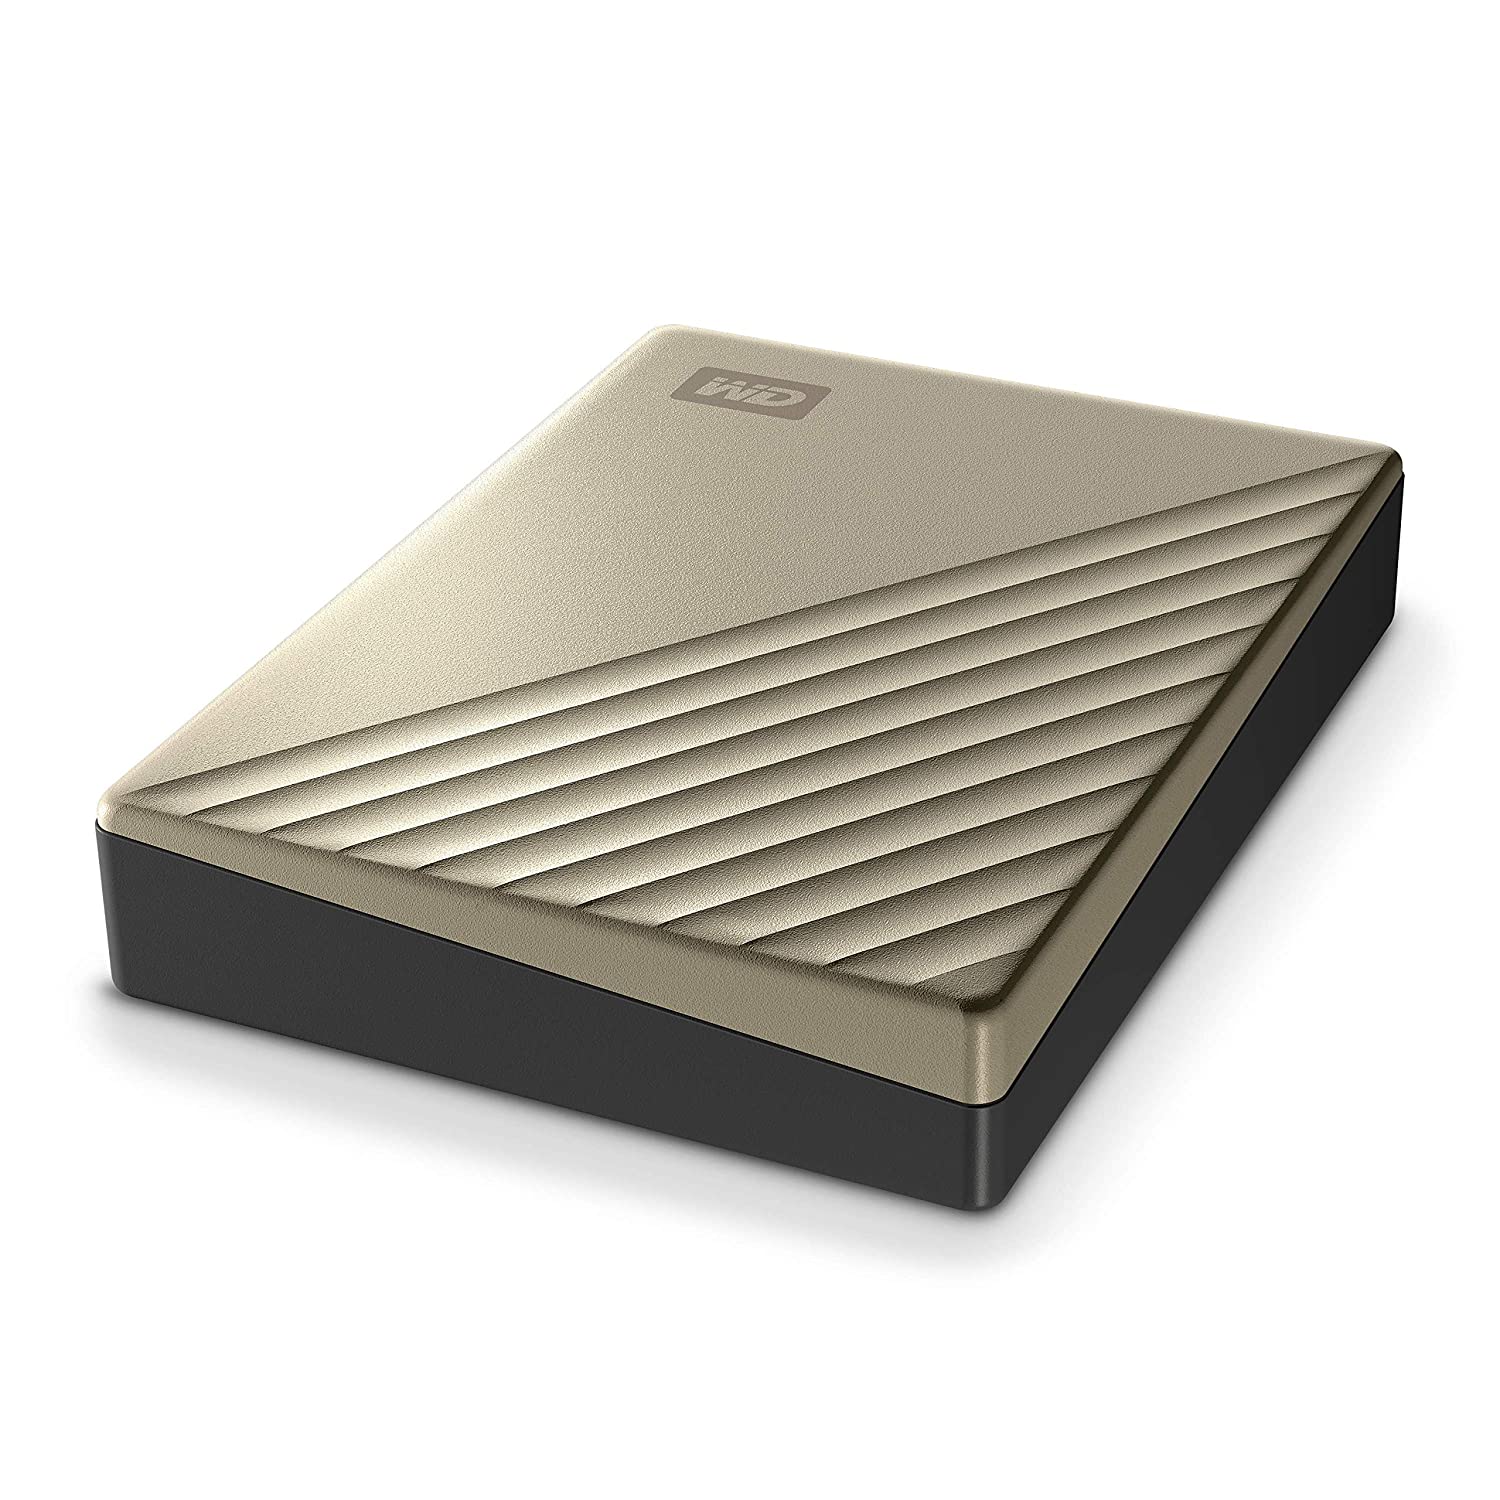 WD 4TB My Passport Portable Hard Disk Drive With USB 3.1 For Windows & Mac-Gold